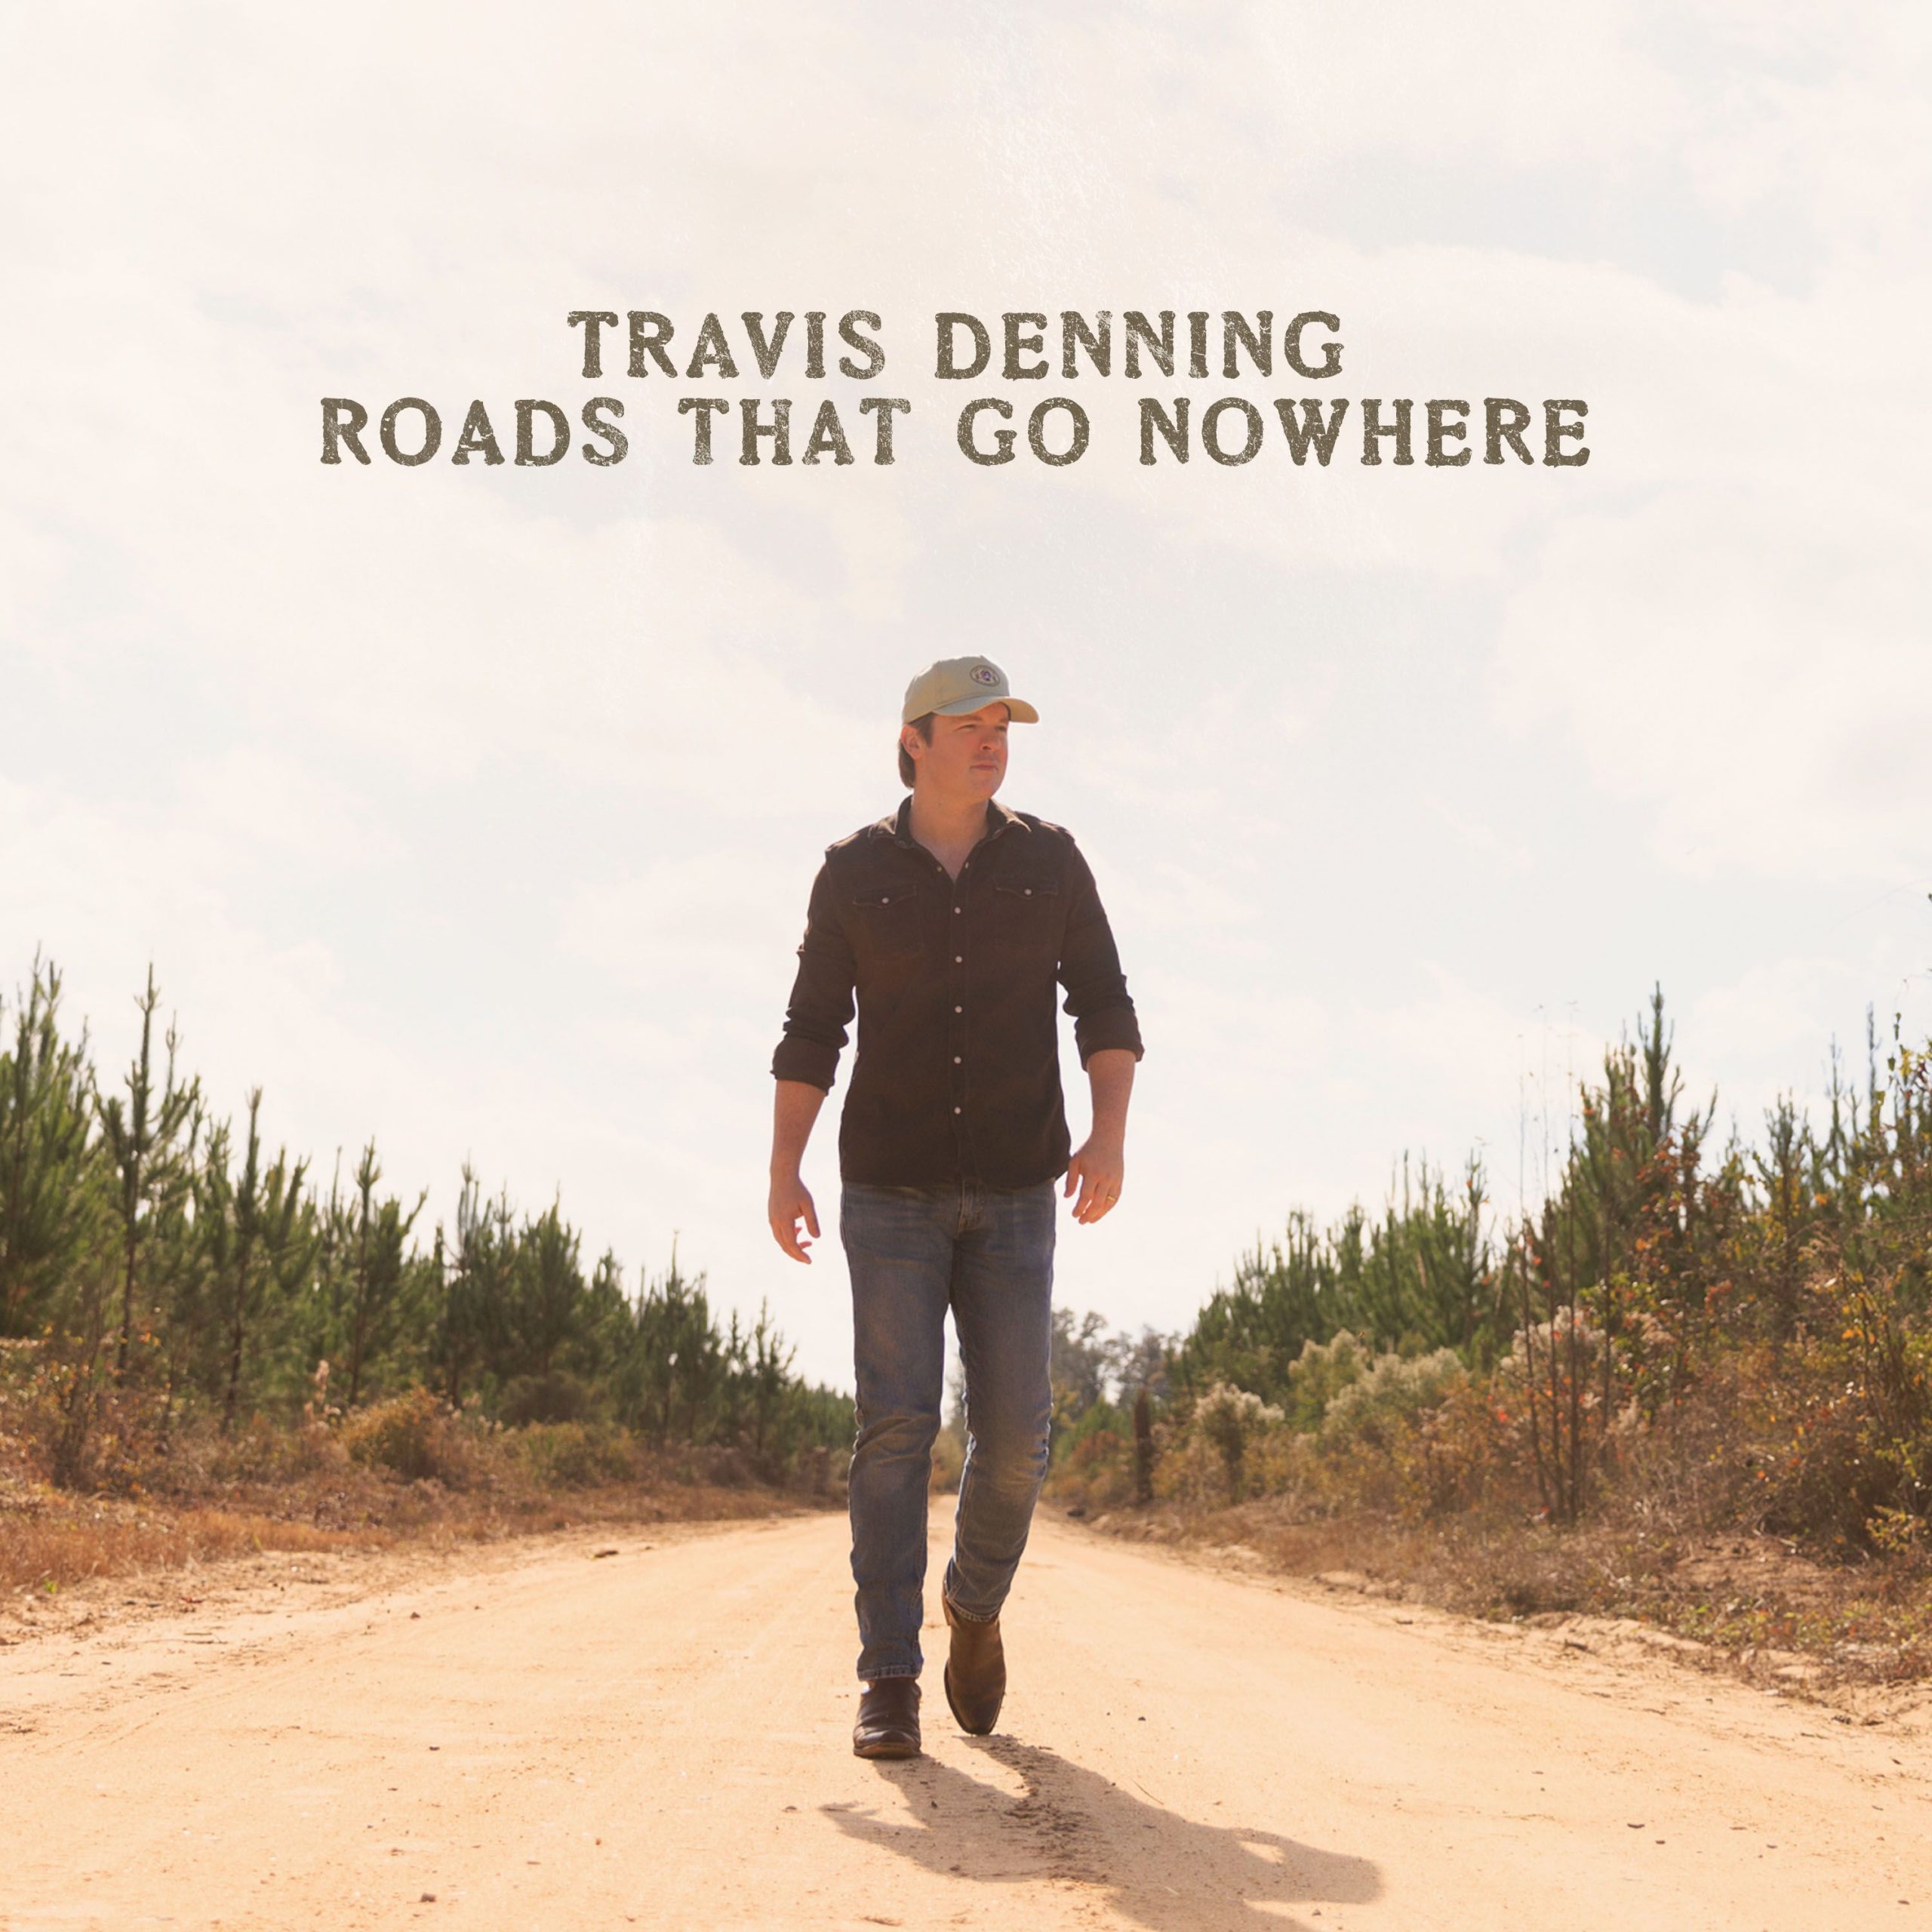 TRAVIS DENNING RELEASES NEW TRACK “ADD HER TO THE LIST” OFF HIS UPCOMING DEBUT ALBUM ‘ROADS THAT GO NOWHERE’ COMING MAY 24